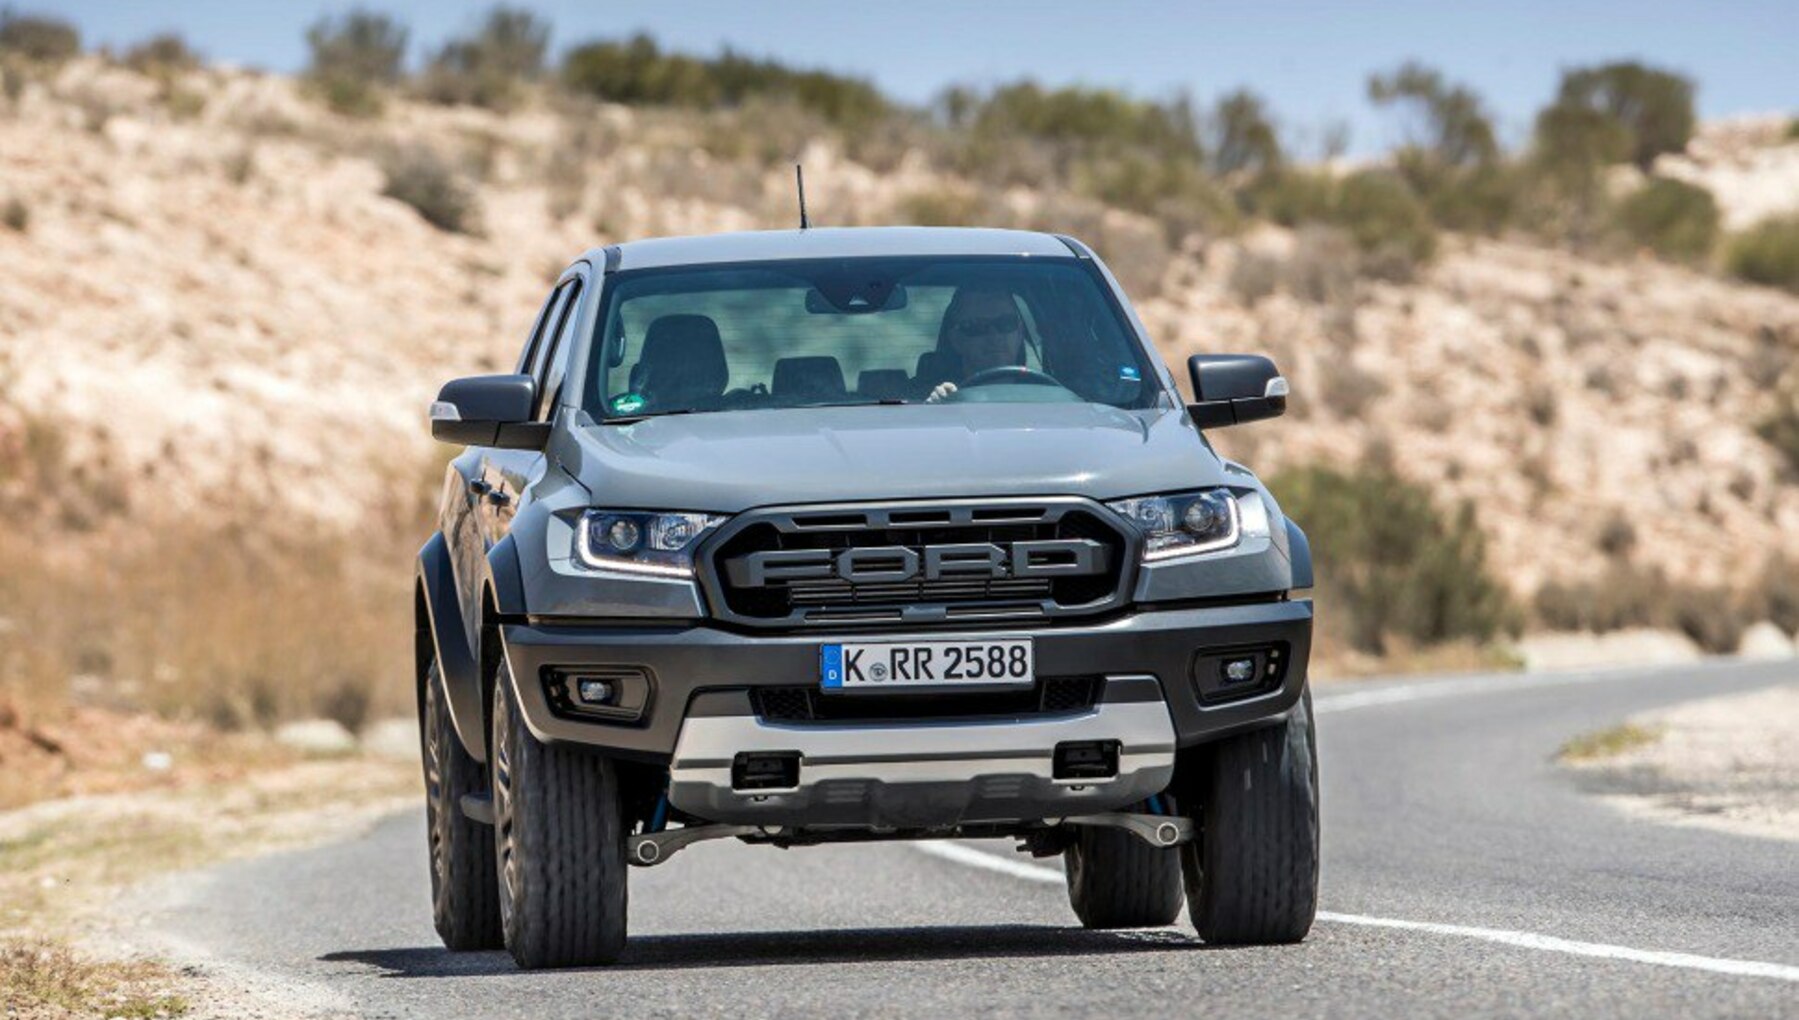 Ford Ranger III Raptor (facelift 2019) 2.0 EcoBlue (213 Hp) 4x4 Automatic 2019, 2020, 2021 